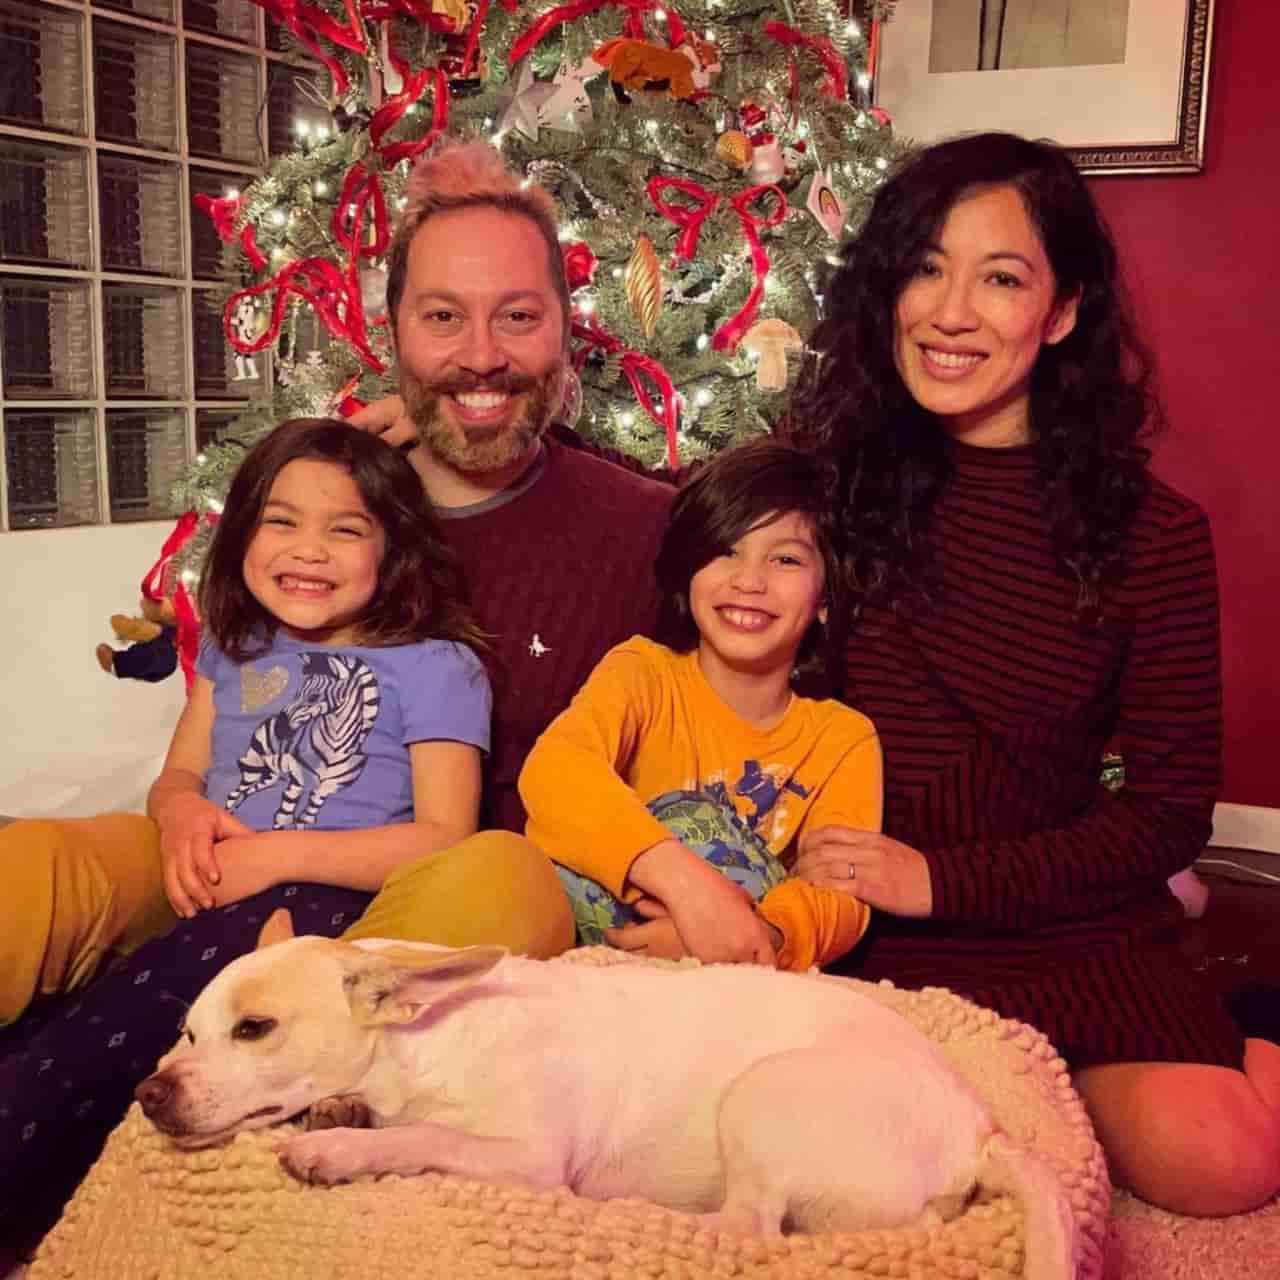 Image of Sam Riegel with his wife, Quyen Tran, and their kids, Maximus and Kestrel